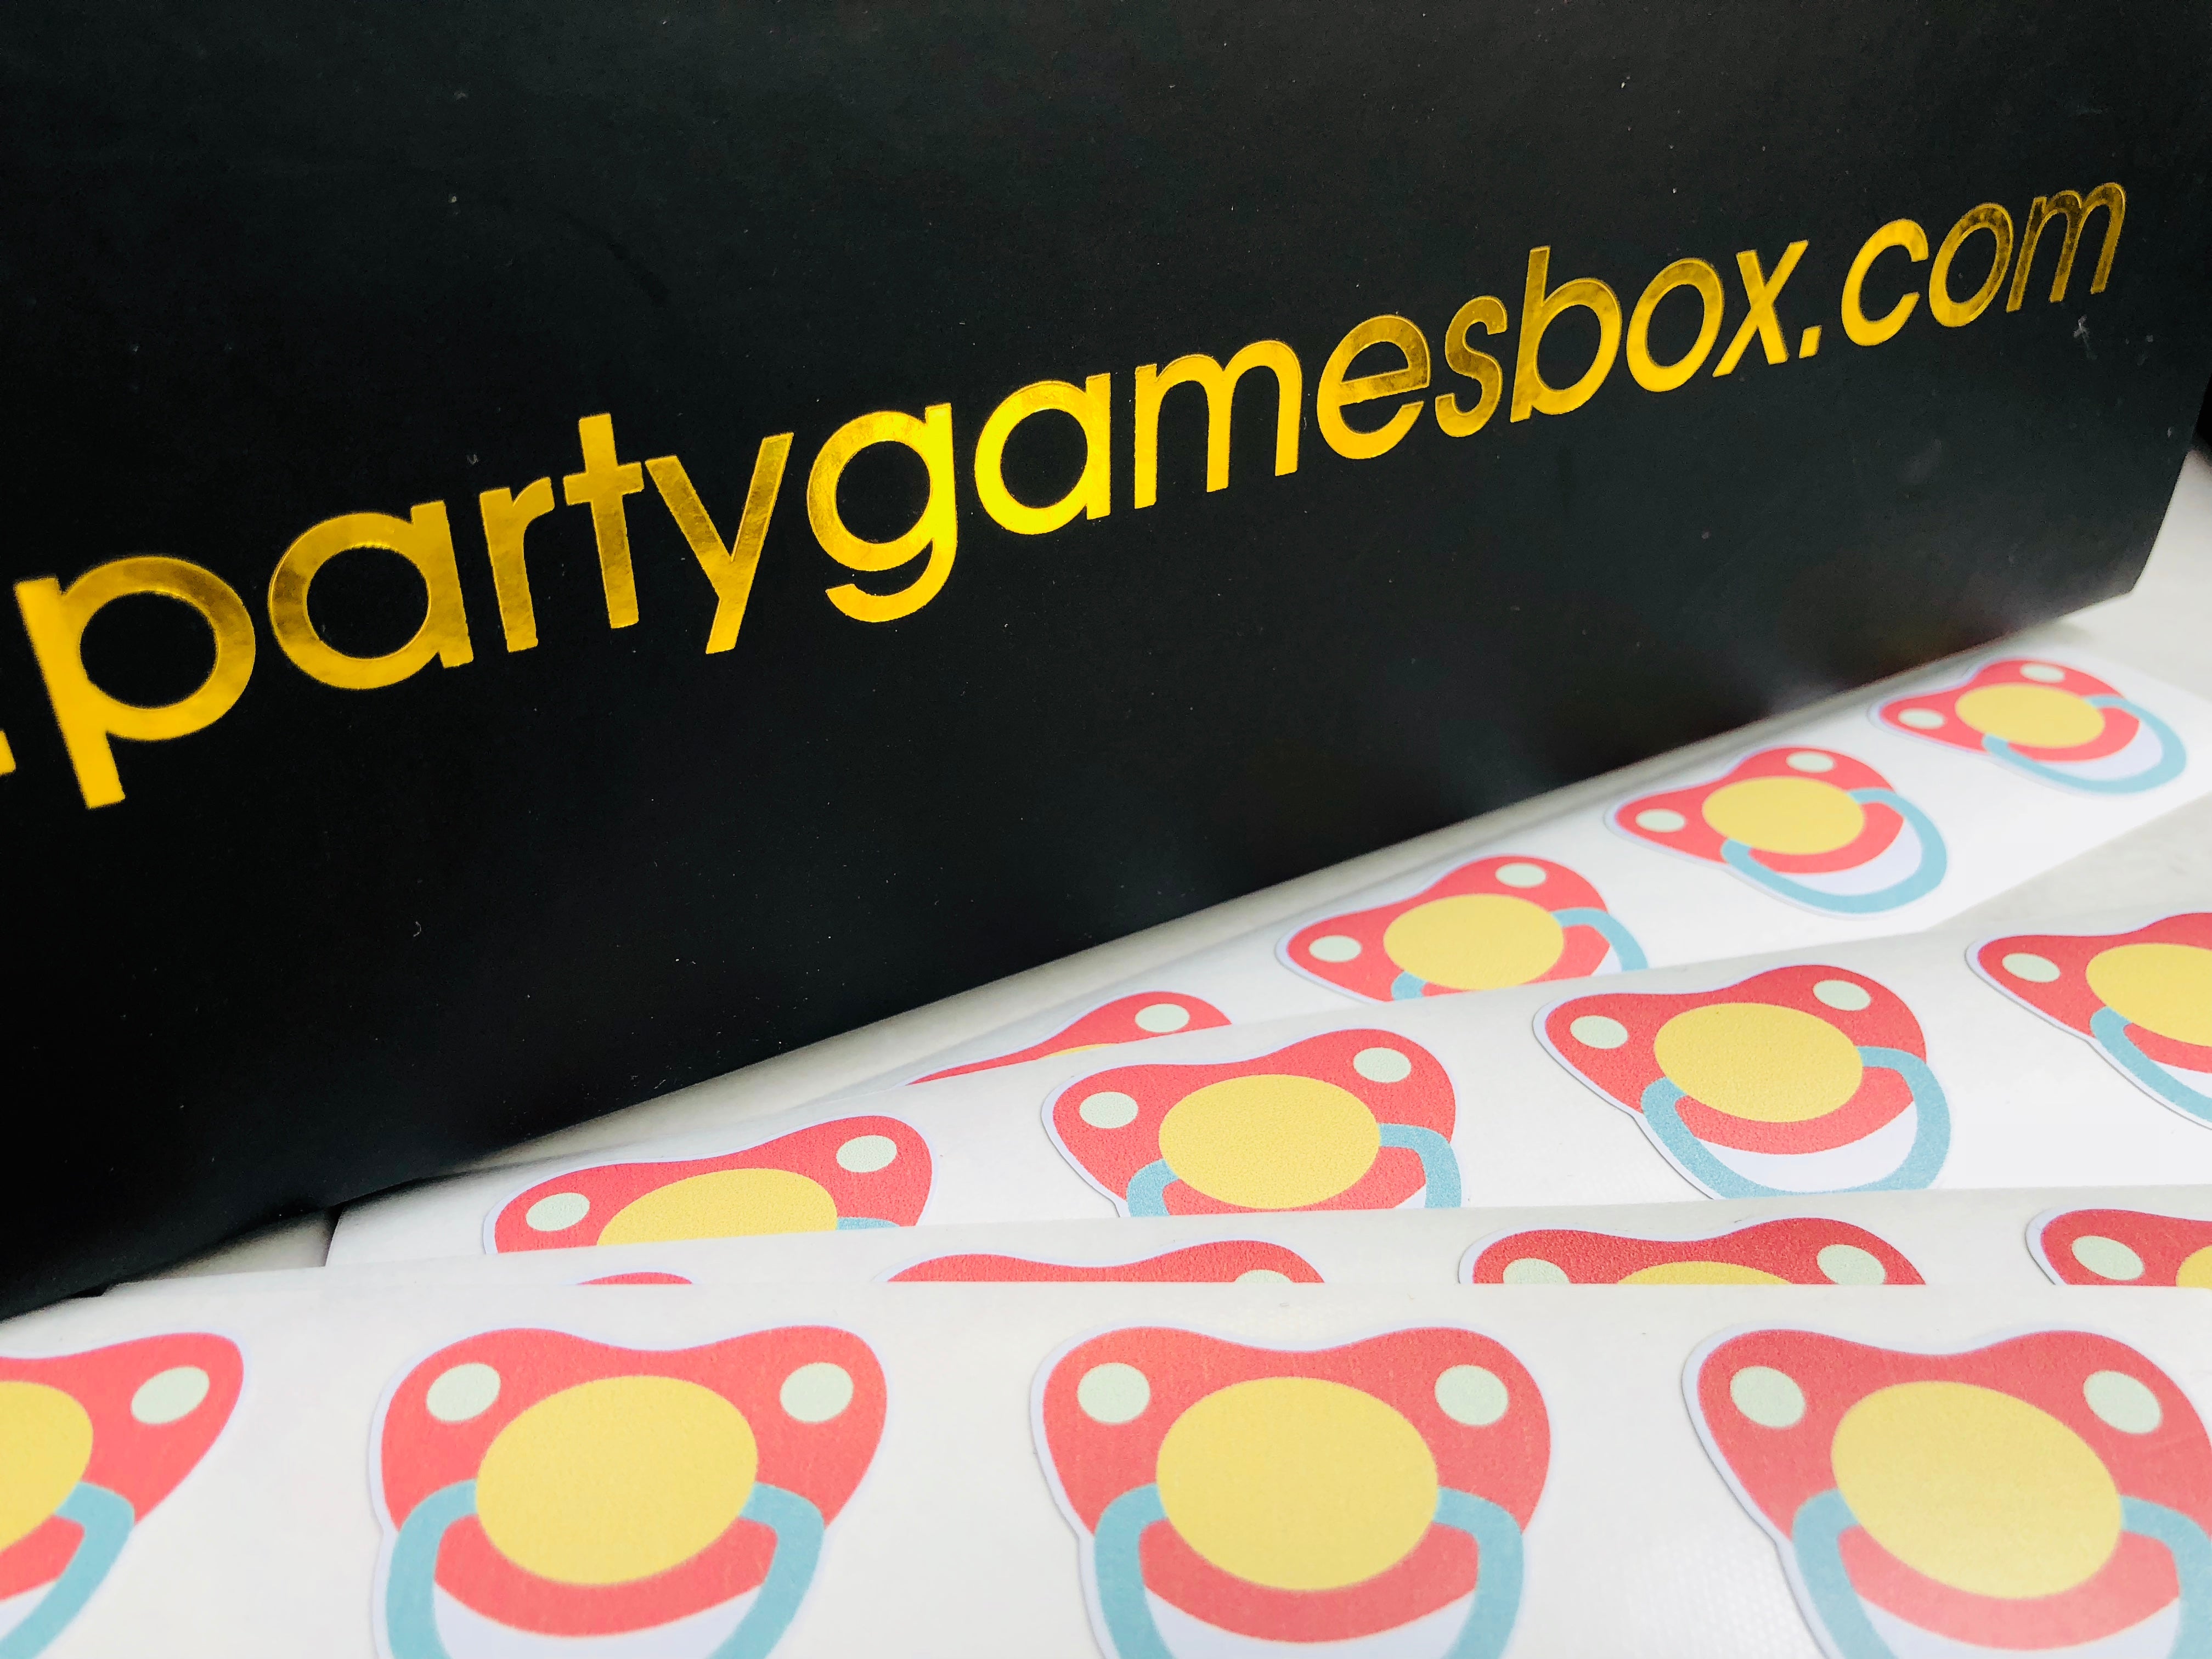 Baby shower party games box